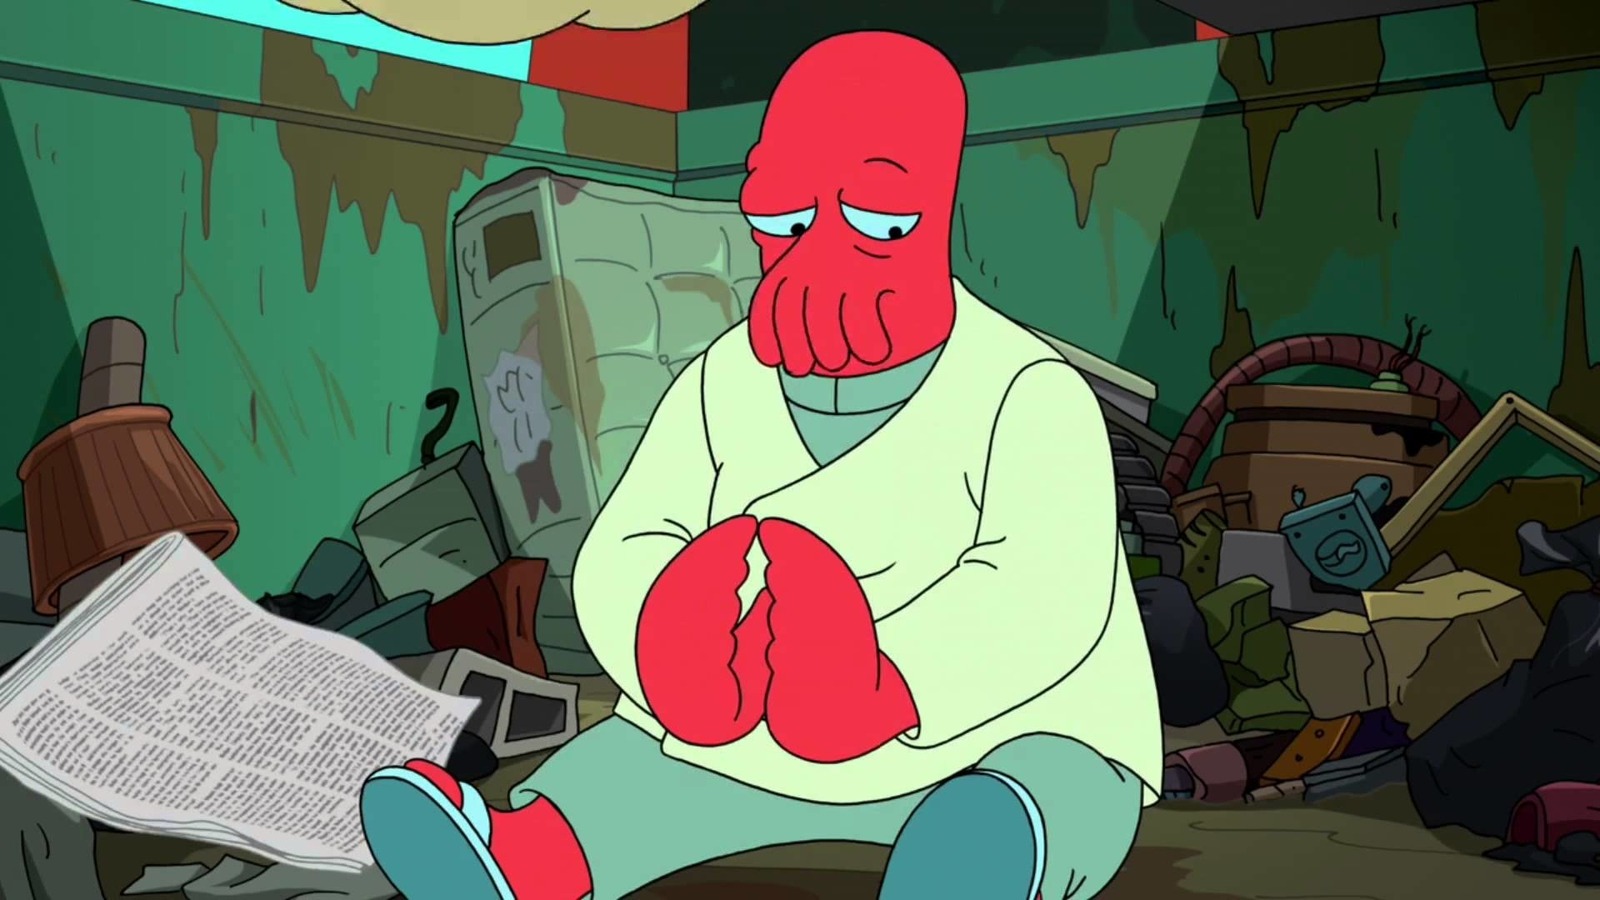 The Futurama Character That Had Producer Eric Kaplan ‘Desperate’ To Work On The Show